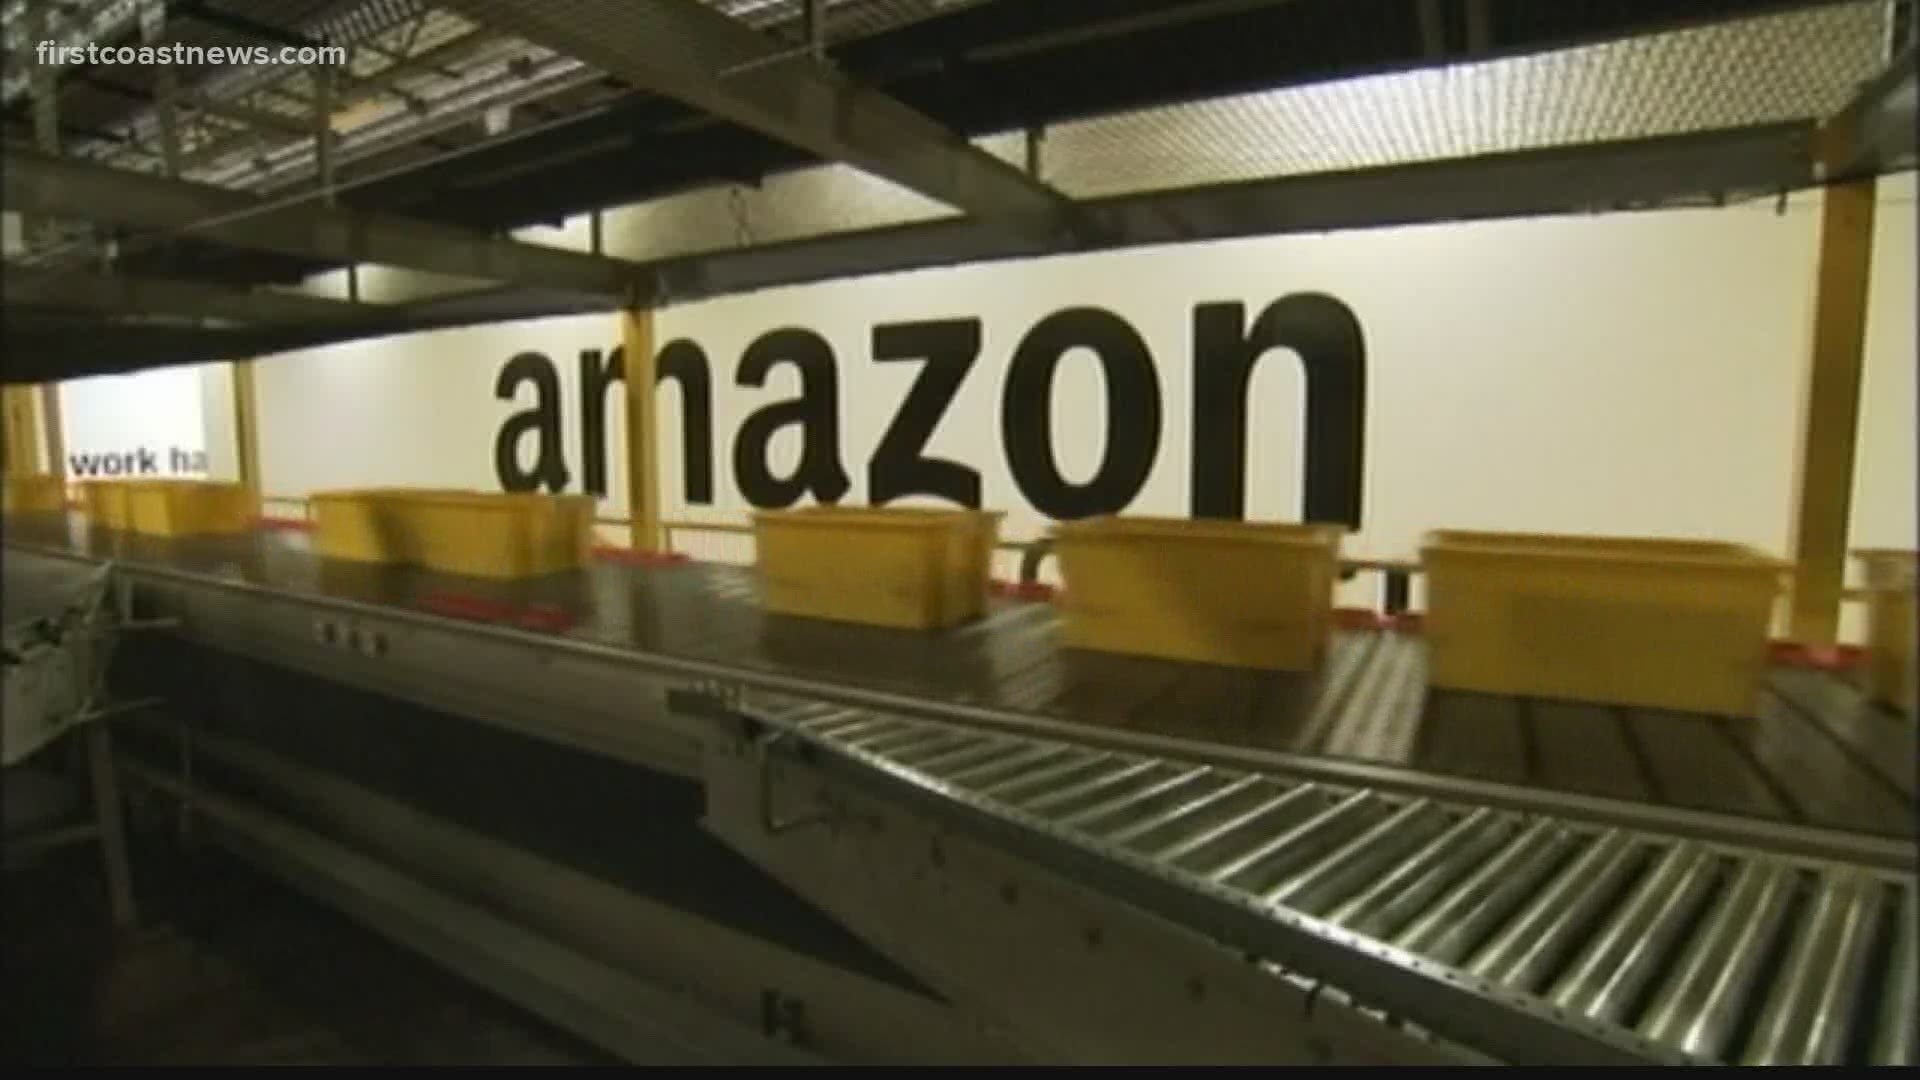 Amazon employees are telling First Coast News the company is not doing enough to protect workers from COVID-19.